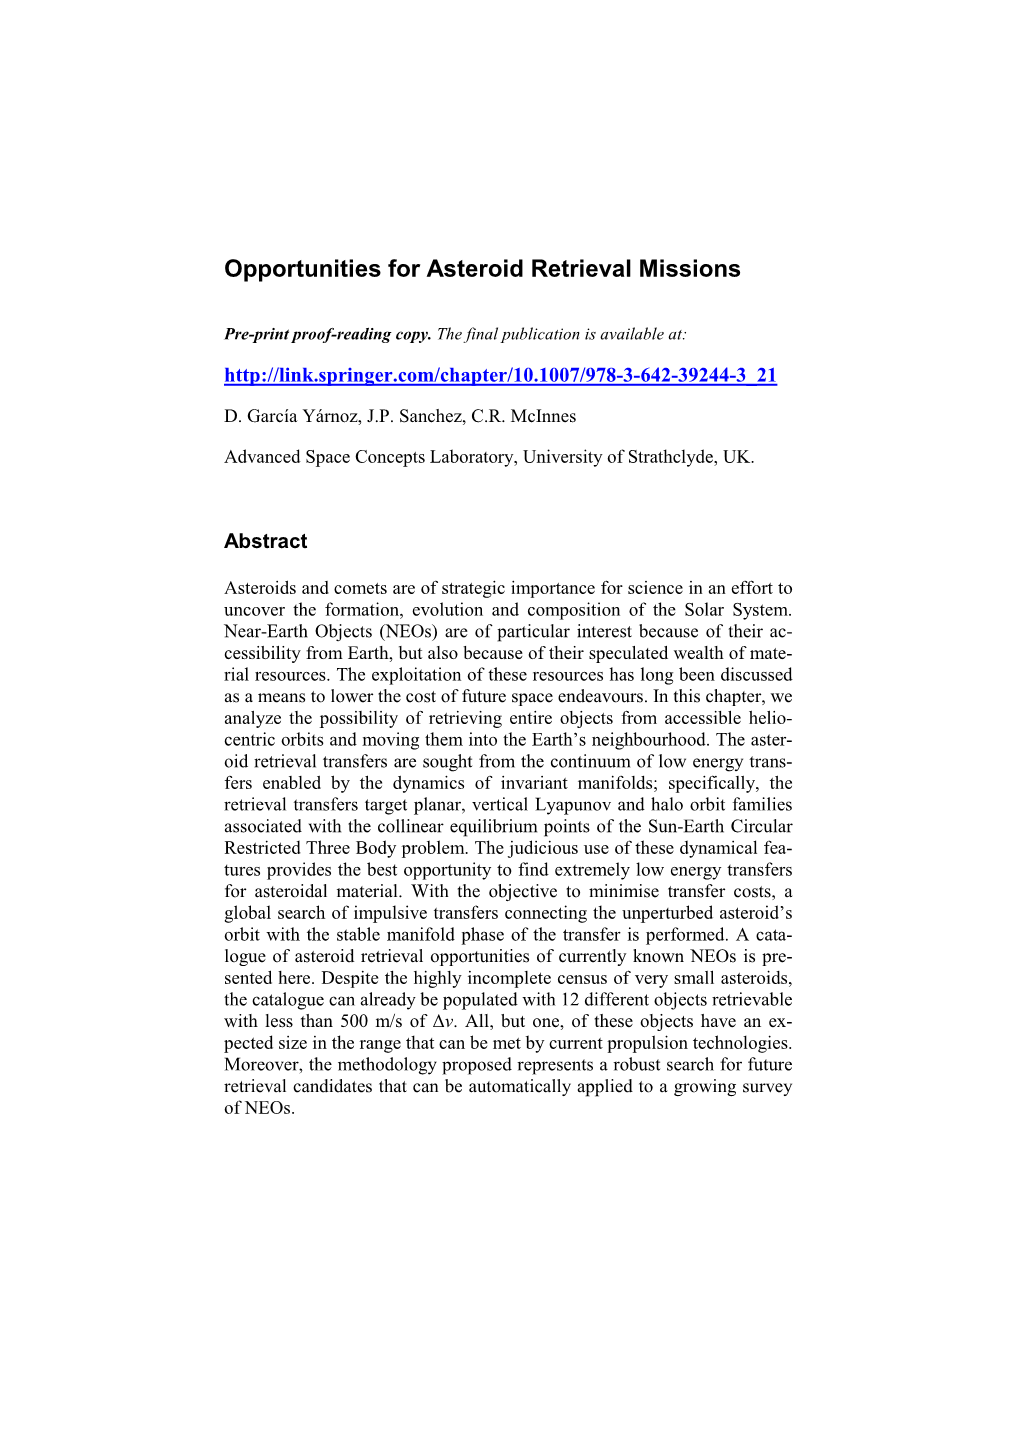 Opportunities for Asteroid Retrieval Missions